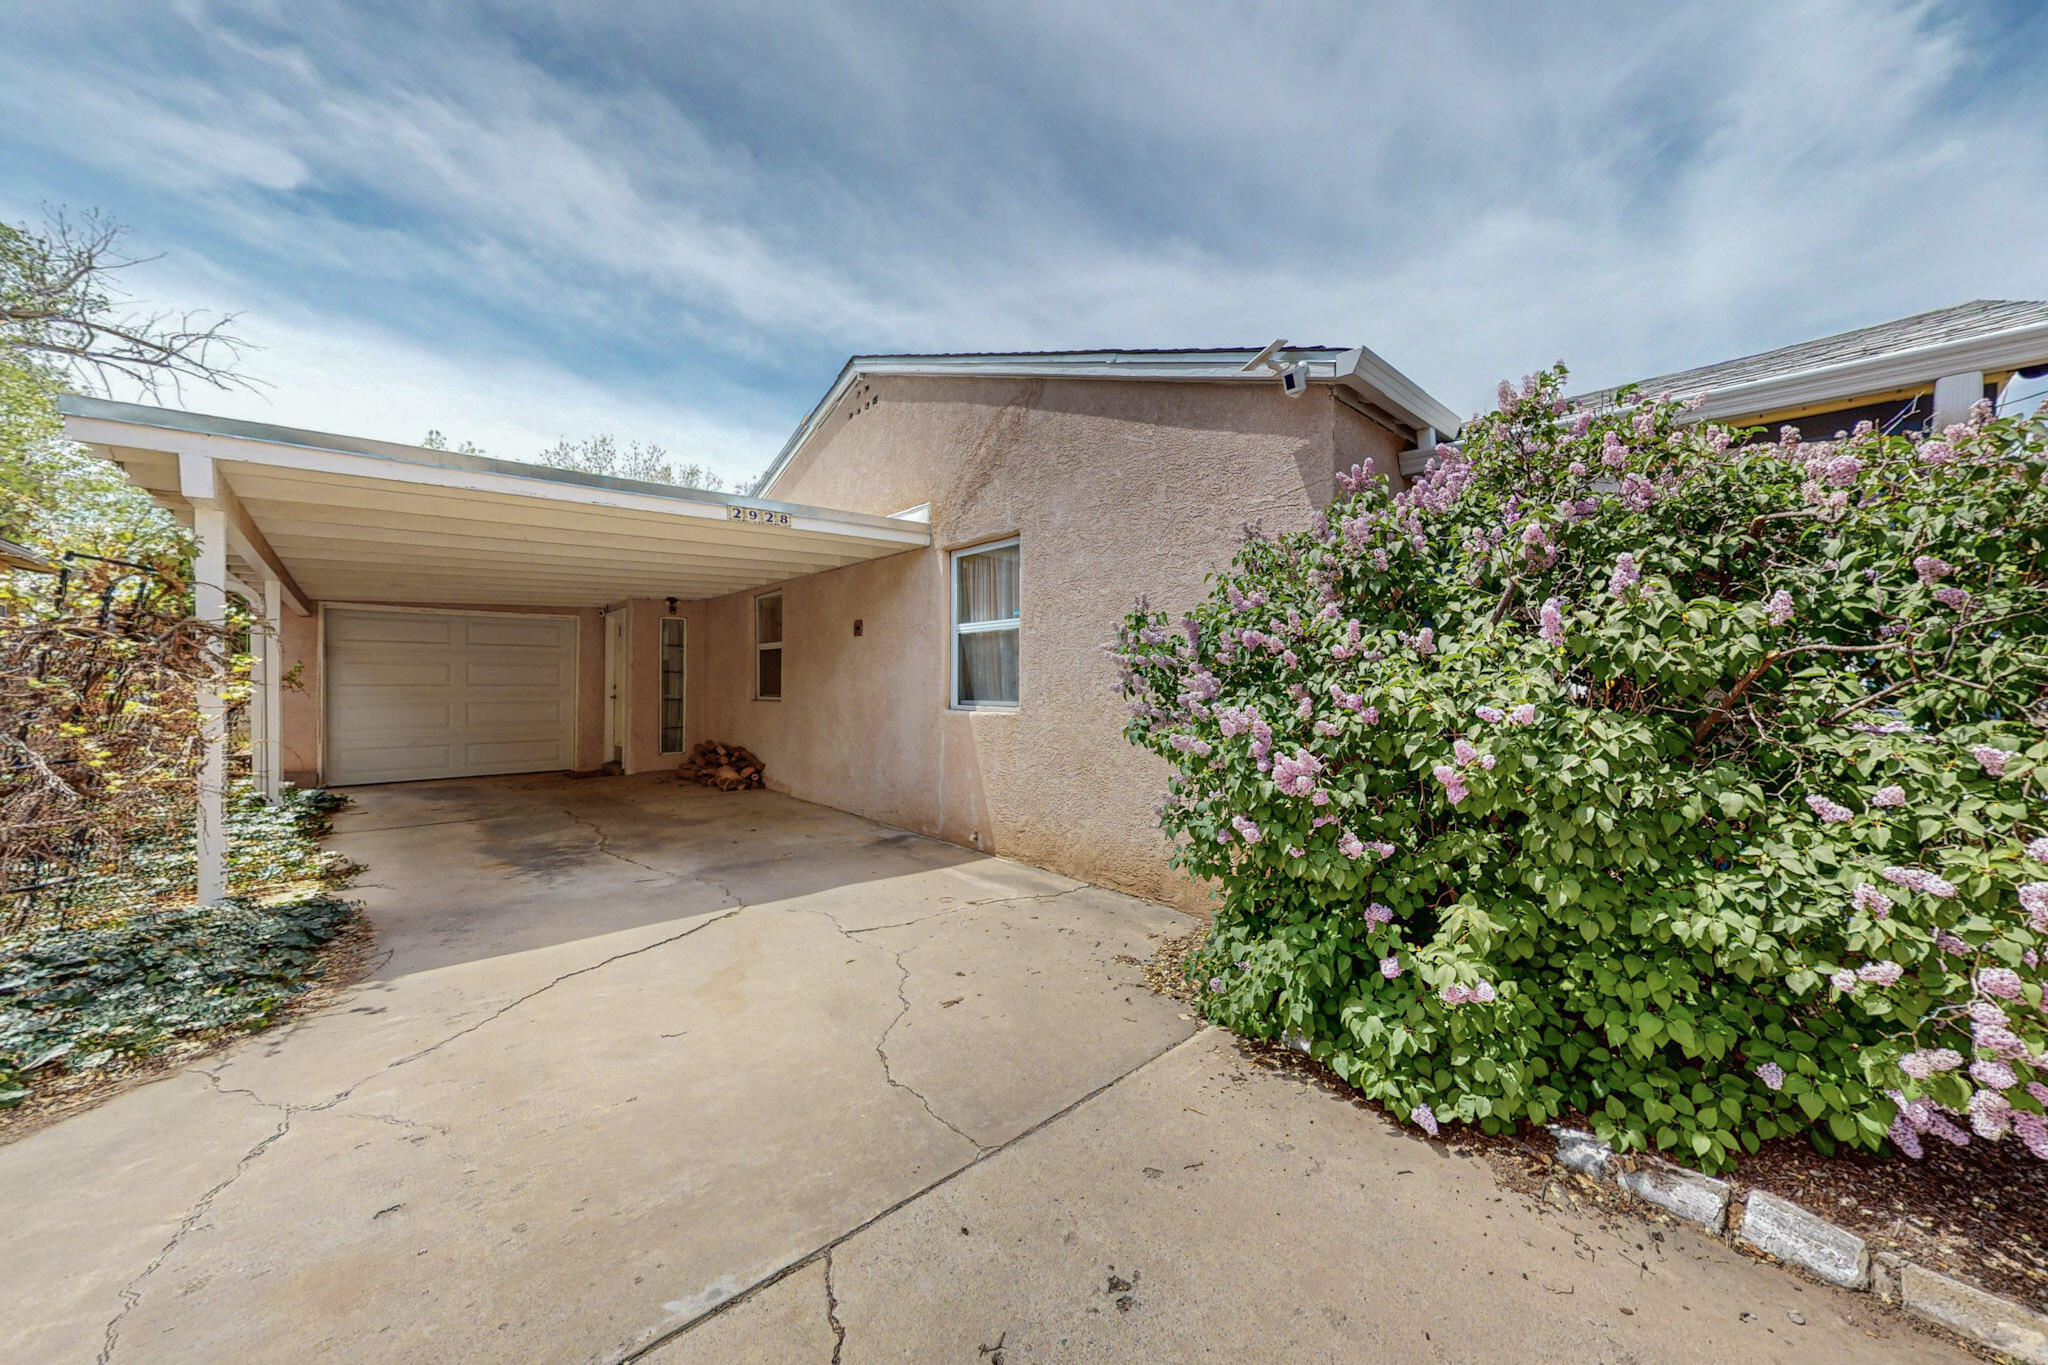 2928 Floral Road NW, Albuquerque, New Mexico 87104, 3 Bedrooms Bedrooms, ,2 BathroomsBathrooms,Residential,For Sale,2928 Floral Road NW,1061080